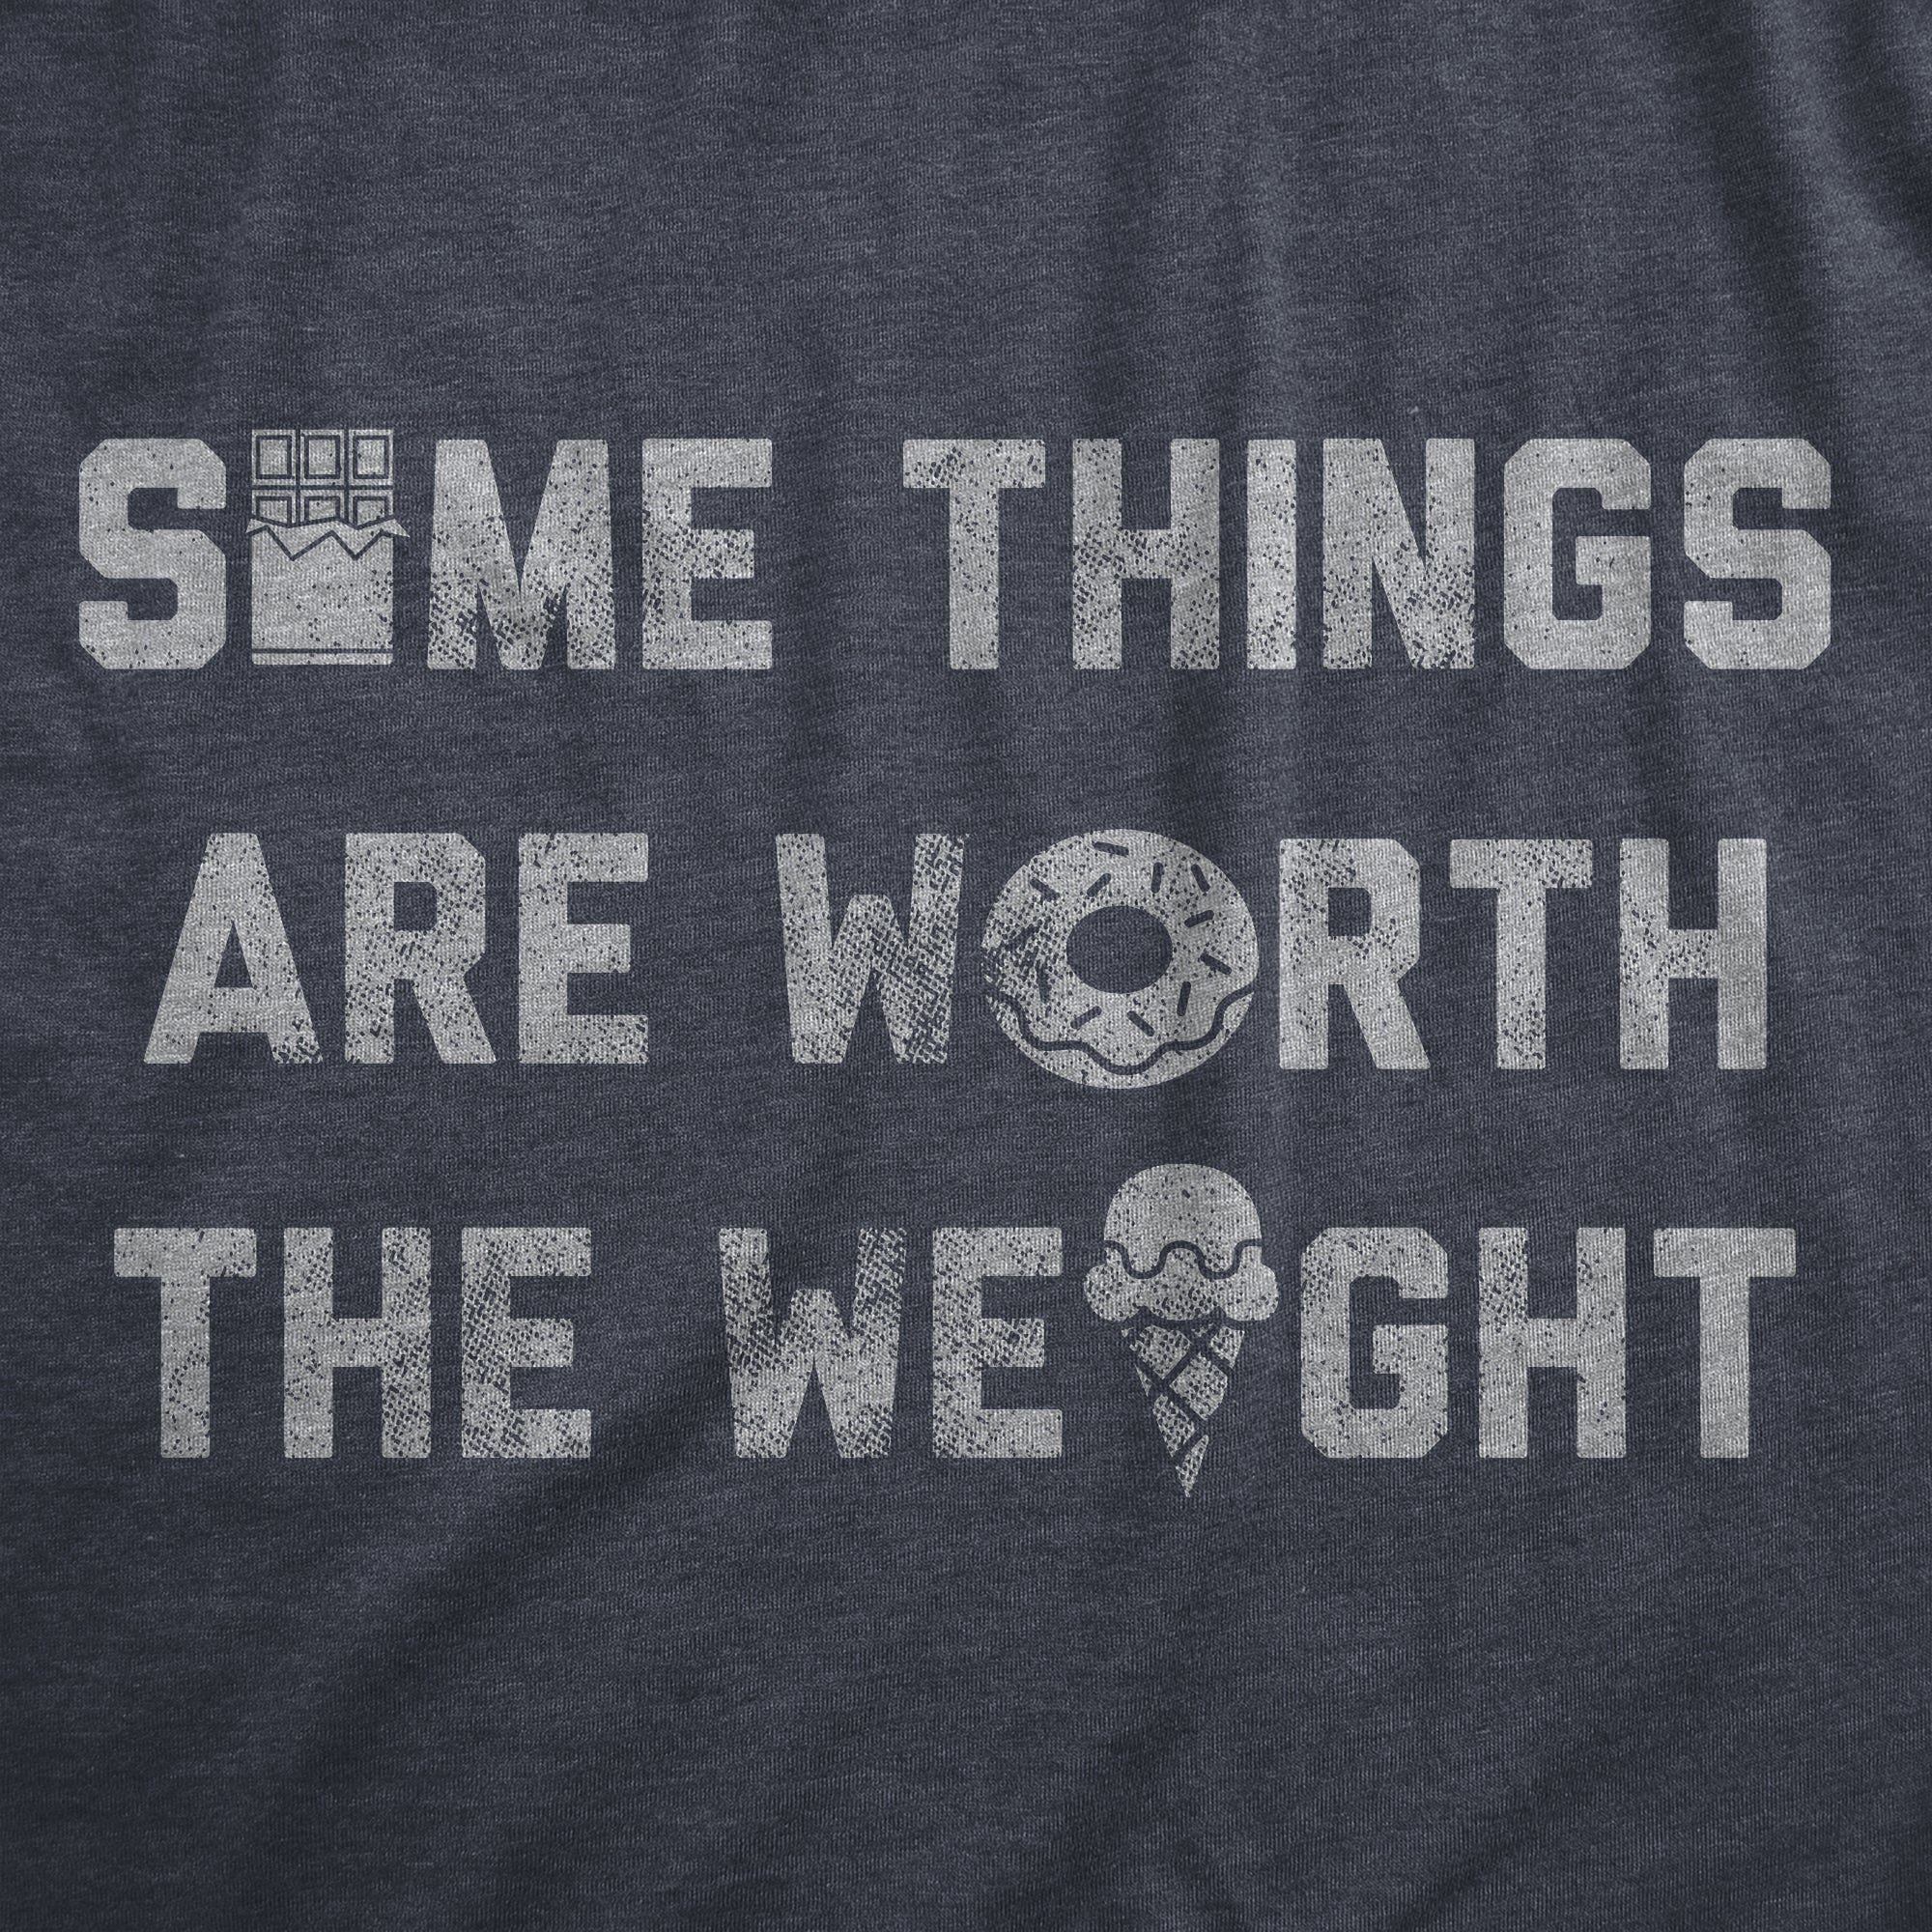 Funny Heather Navy - WEIGHT Some Things Are Worth The Weight Mens T Shirt Nerdy Food sarcastic Tee